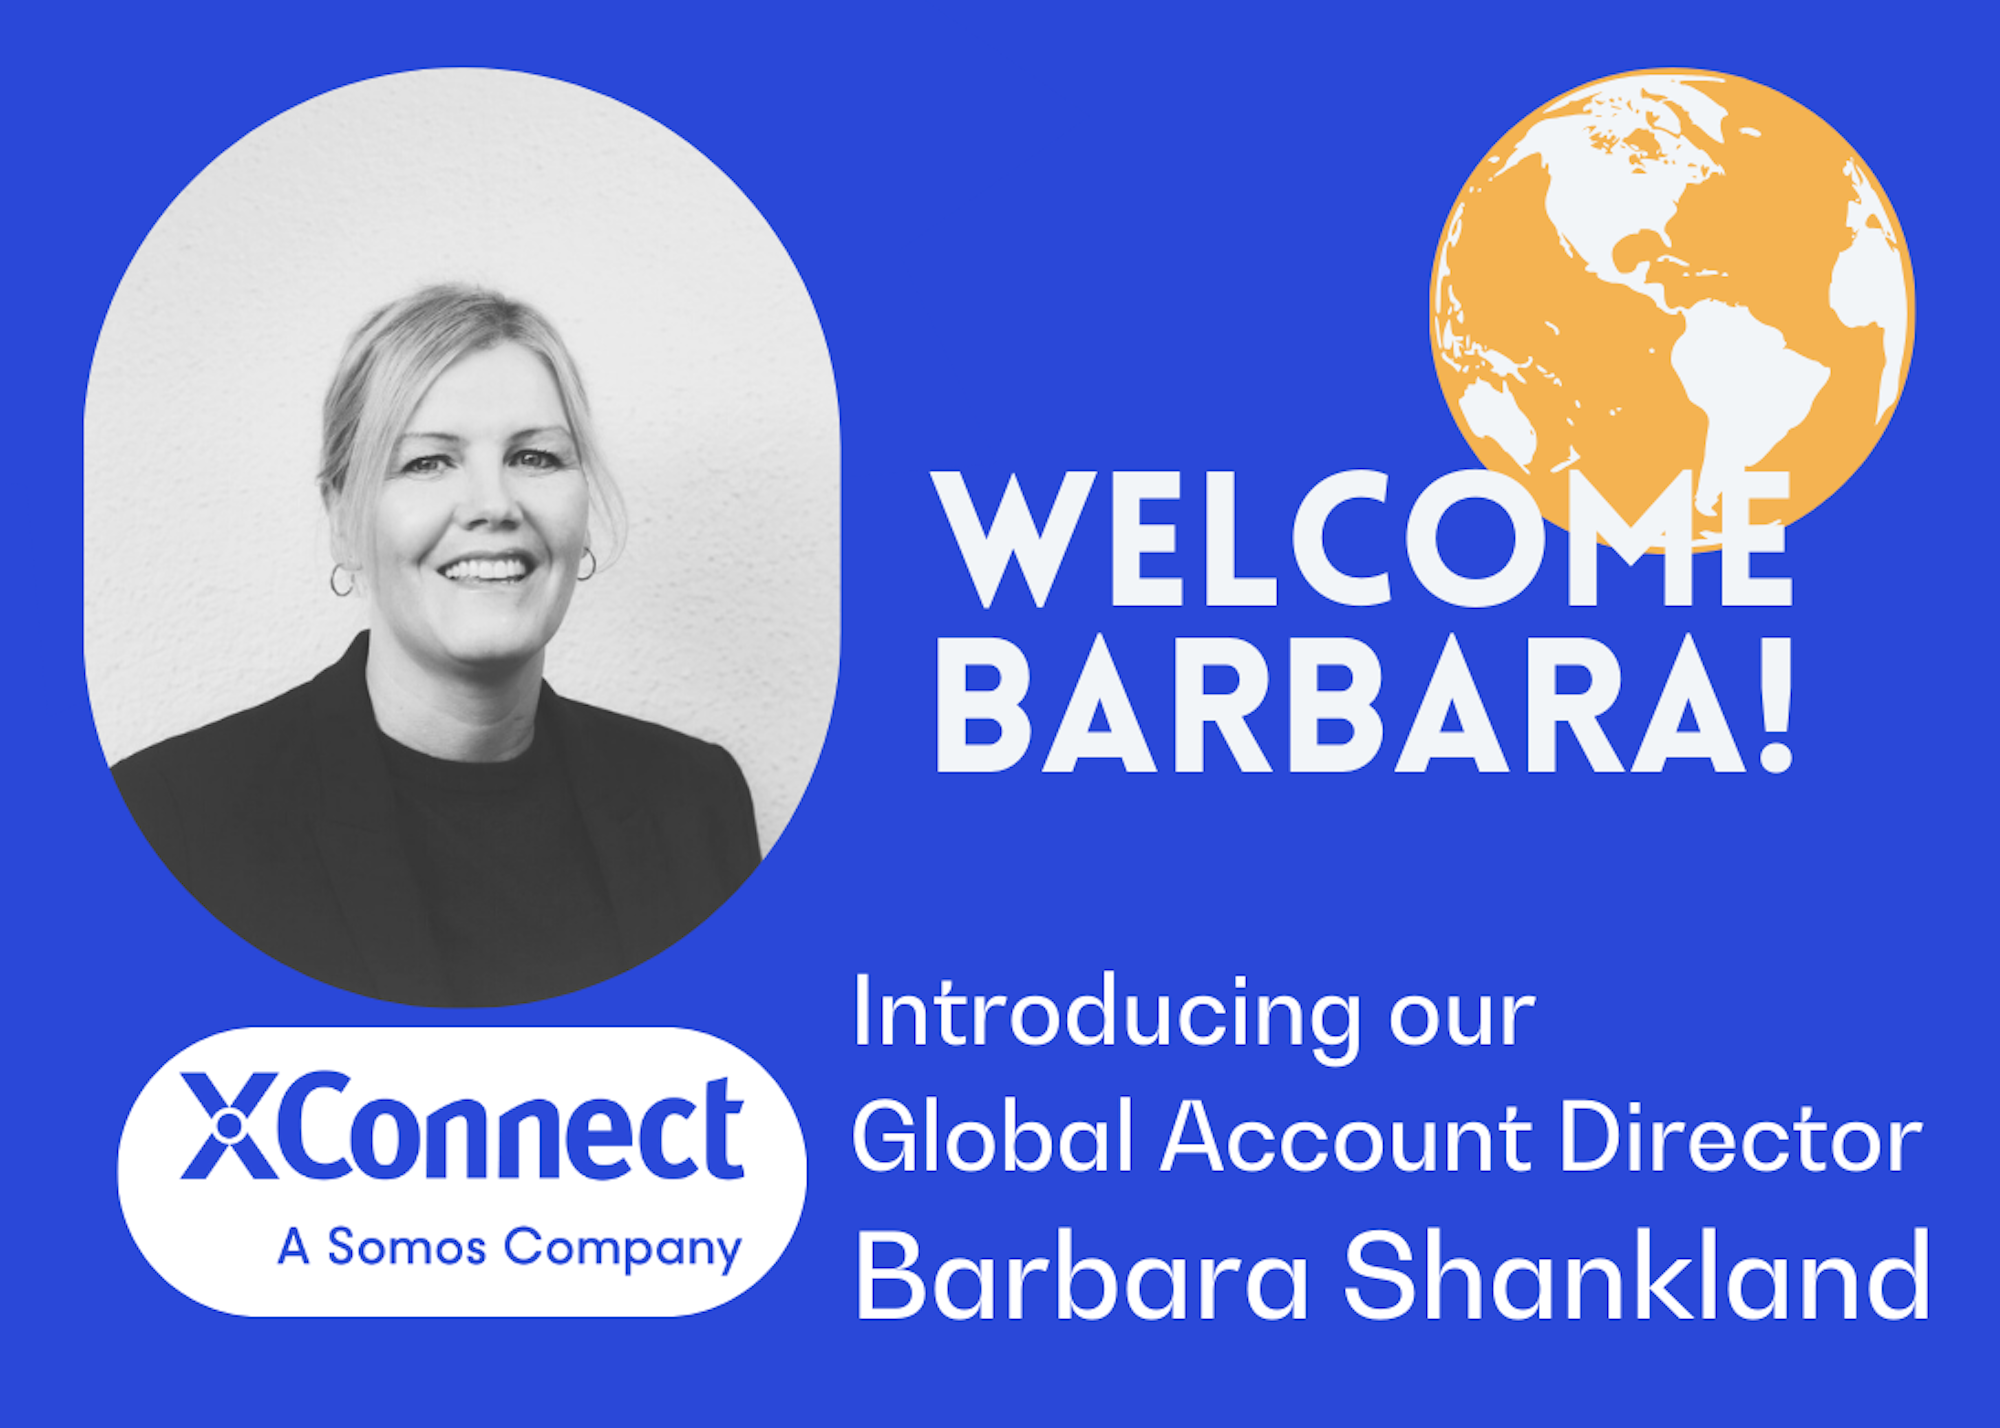 XConnect Appoints Barbara Shankland as Global Account Director to Drive Growth for A2P and Voice Customers